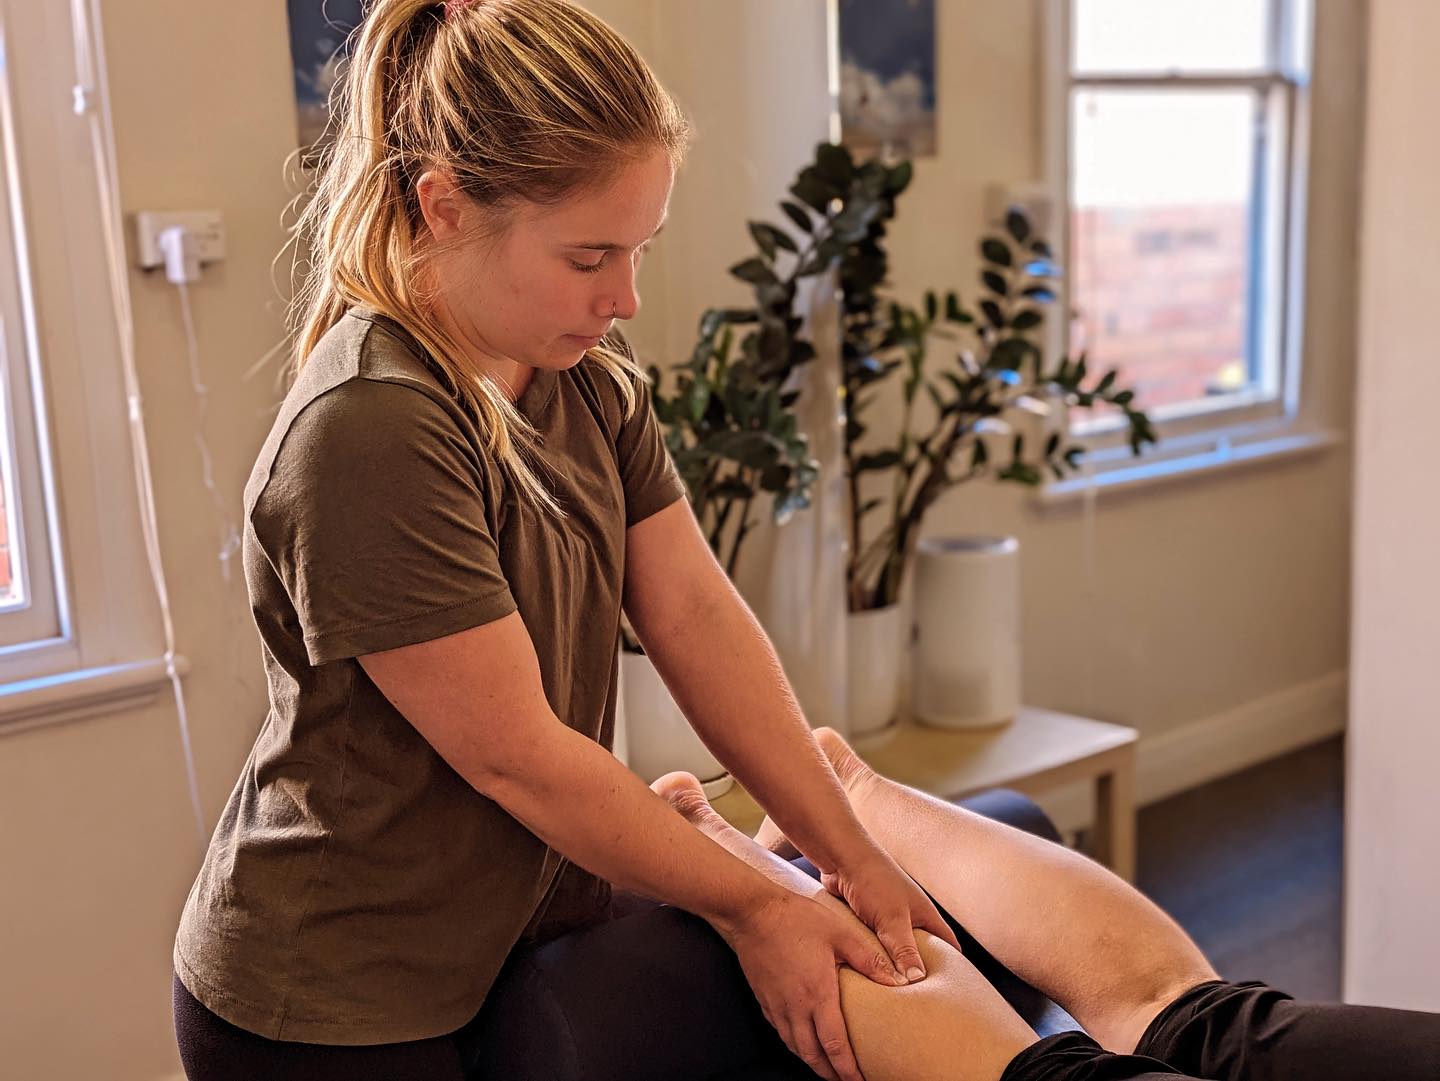 Calf and Achilles pain is a common complaint, especially among runners, sports-people or keen walkers.
Our physios are able to diagnose, treat and manage these conditions through hands on and exercise therapy as well as education and advise on getting back to what you enjoy!